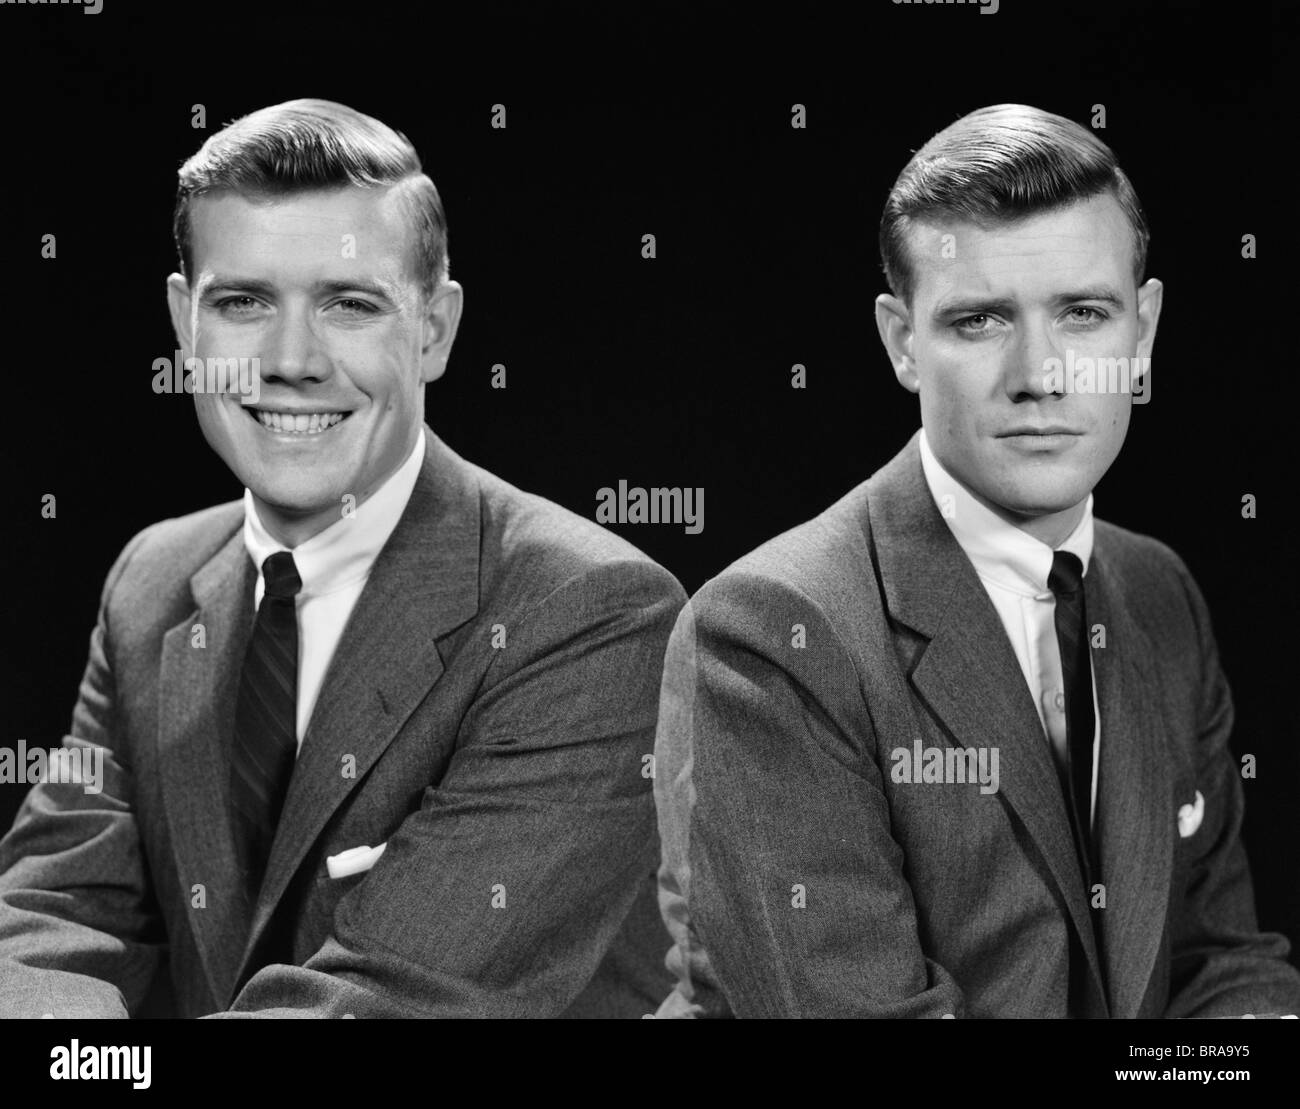 1950s DOUBLE EXPOSURE OF MAN WITH A SMILE AND A FROWN WEARING A SUIT Stock Photo